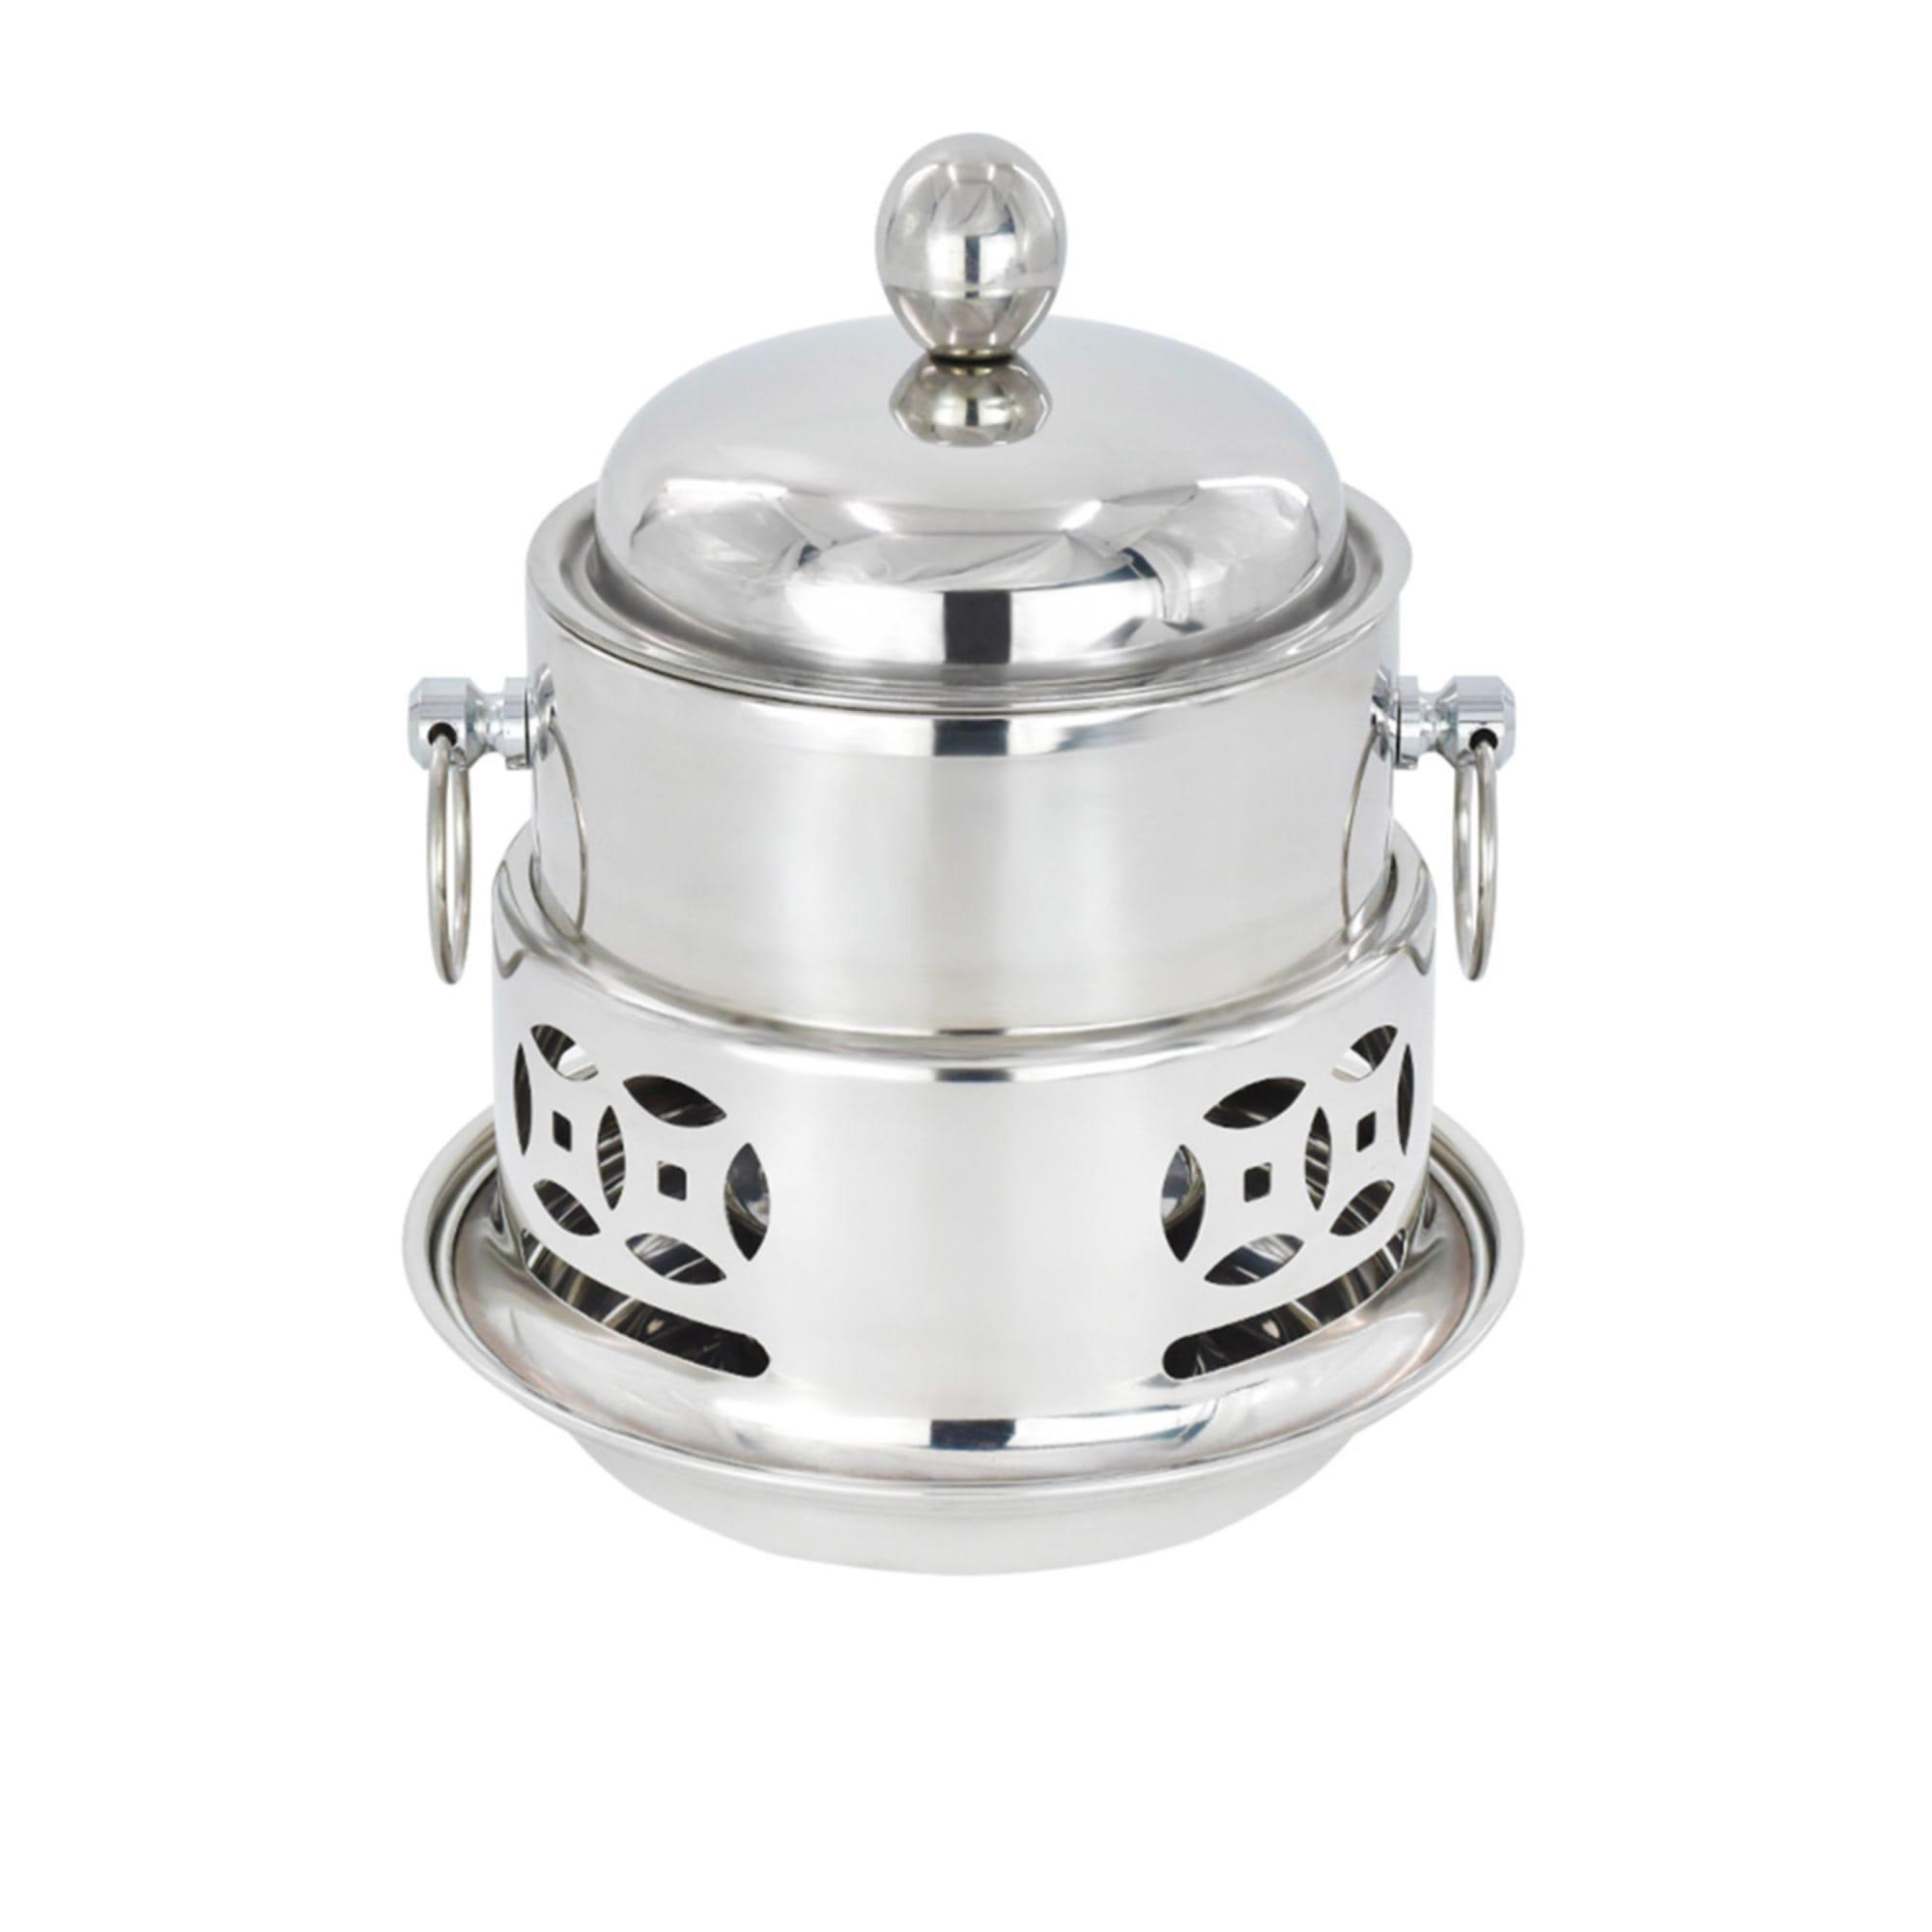 Soga Round Stainless Steel Single Hot Pot with Lid 23cm Image 5